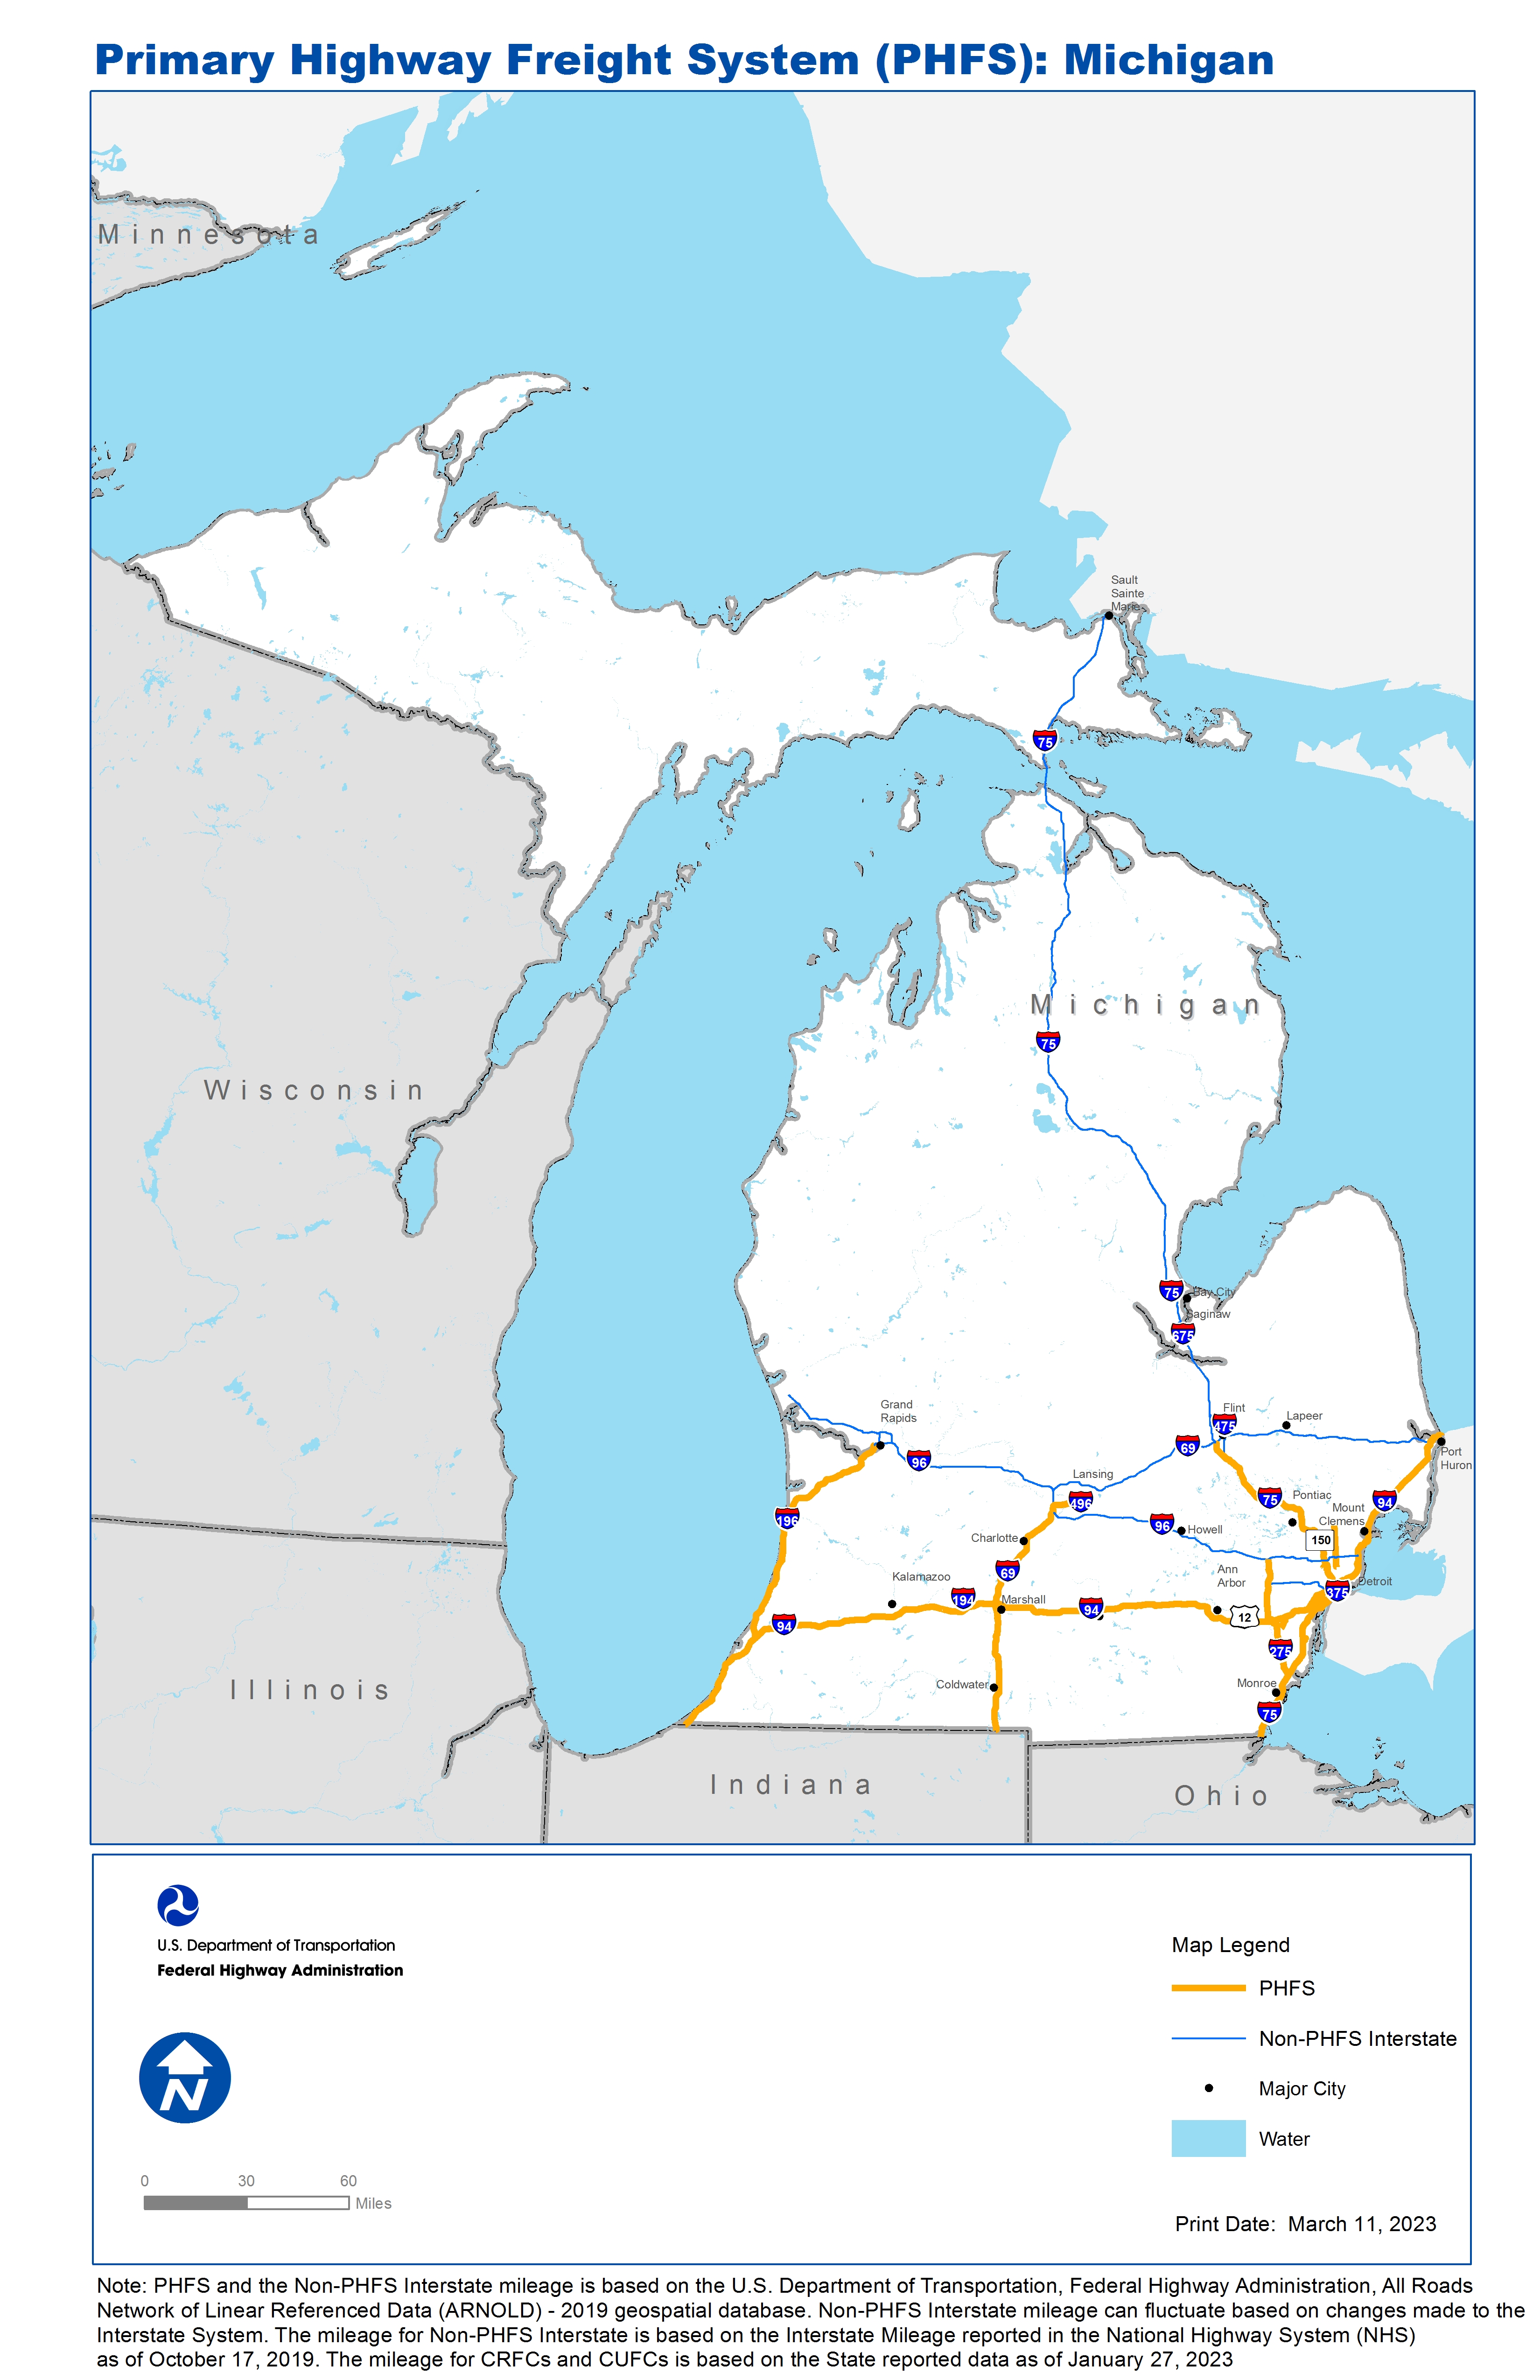 This map shows the Primary Highway Freight System (PHFS) routes as well as all the Interstate Highways within the state that are not part of the PHFS. As an alternative to the map, the Tables below separately list the PHFS routes and the Interstate Highways which are not part of the PHFS.